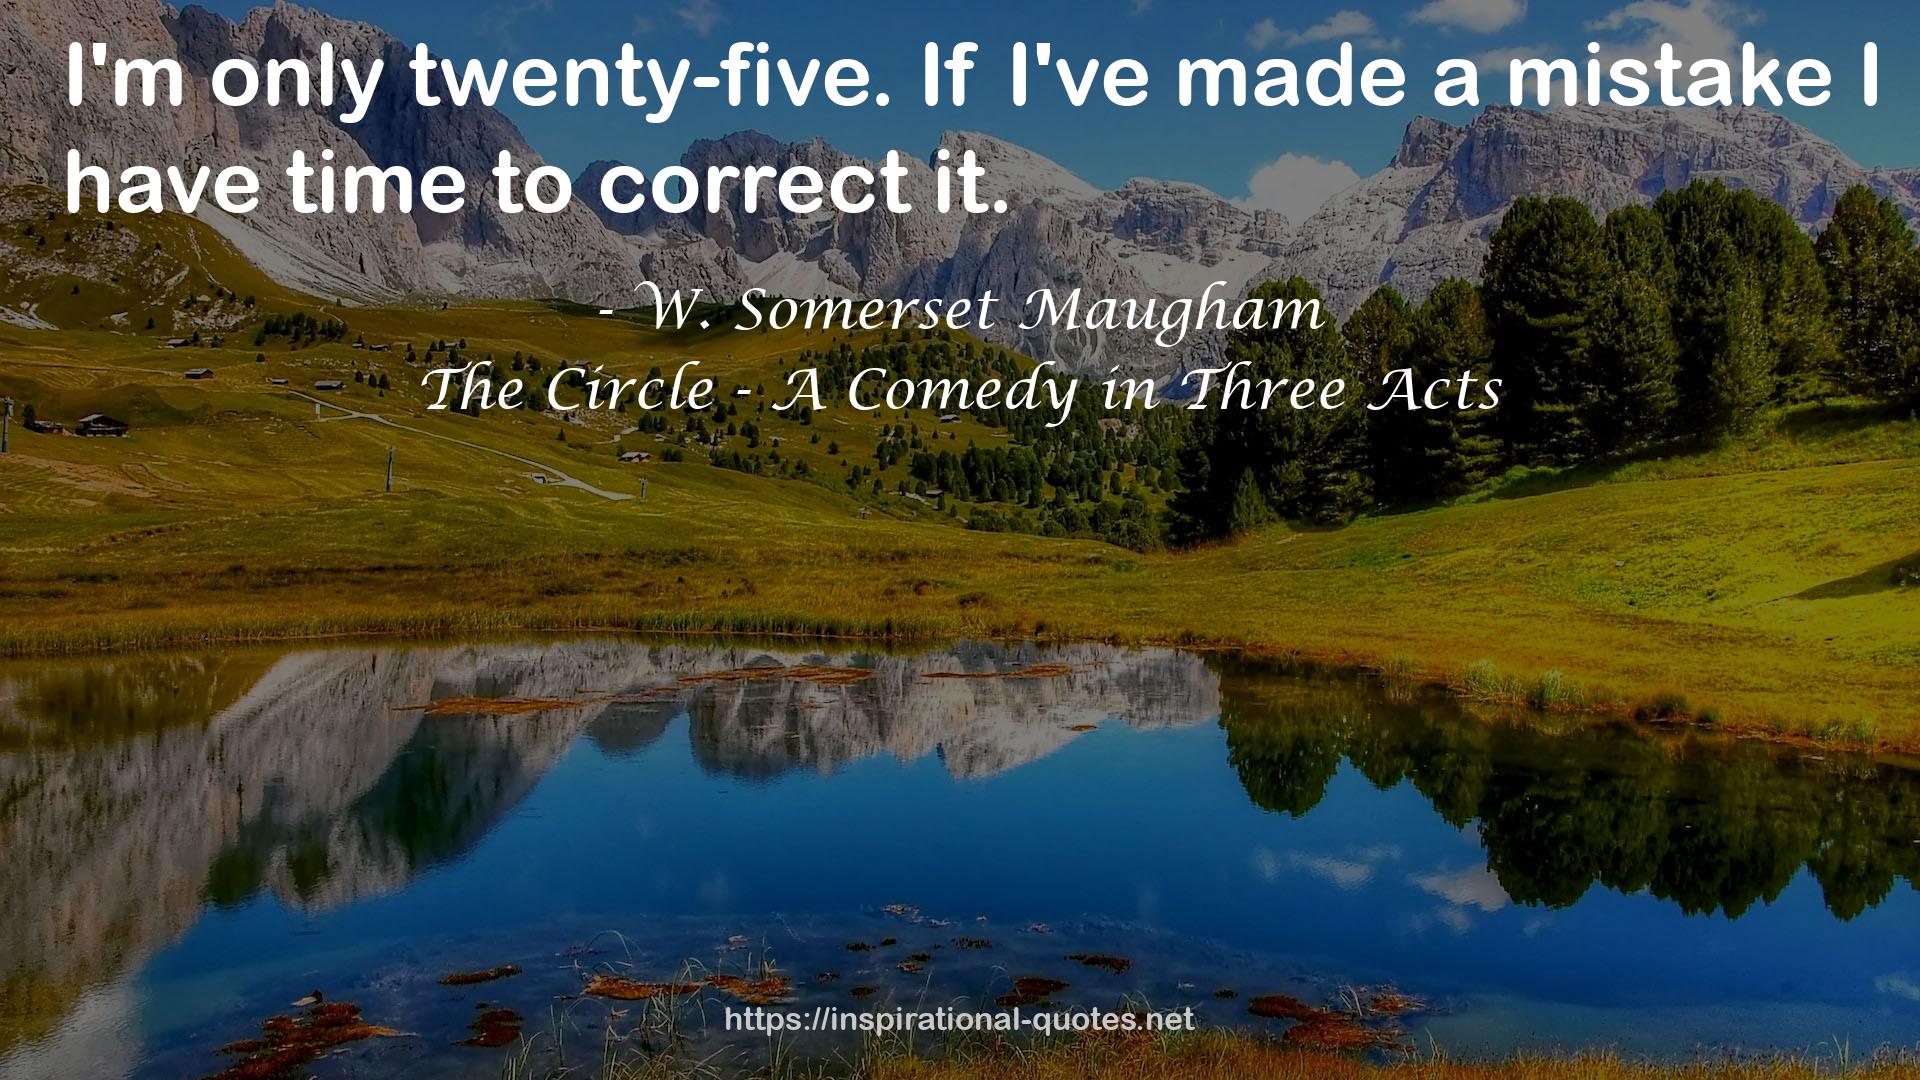 The Circle - A Comedy in Three Acts QUOTES